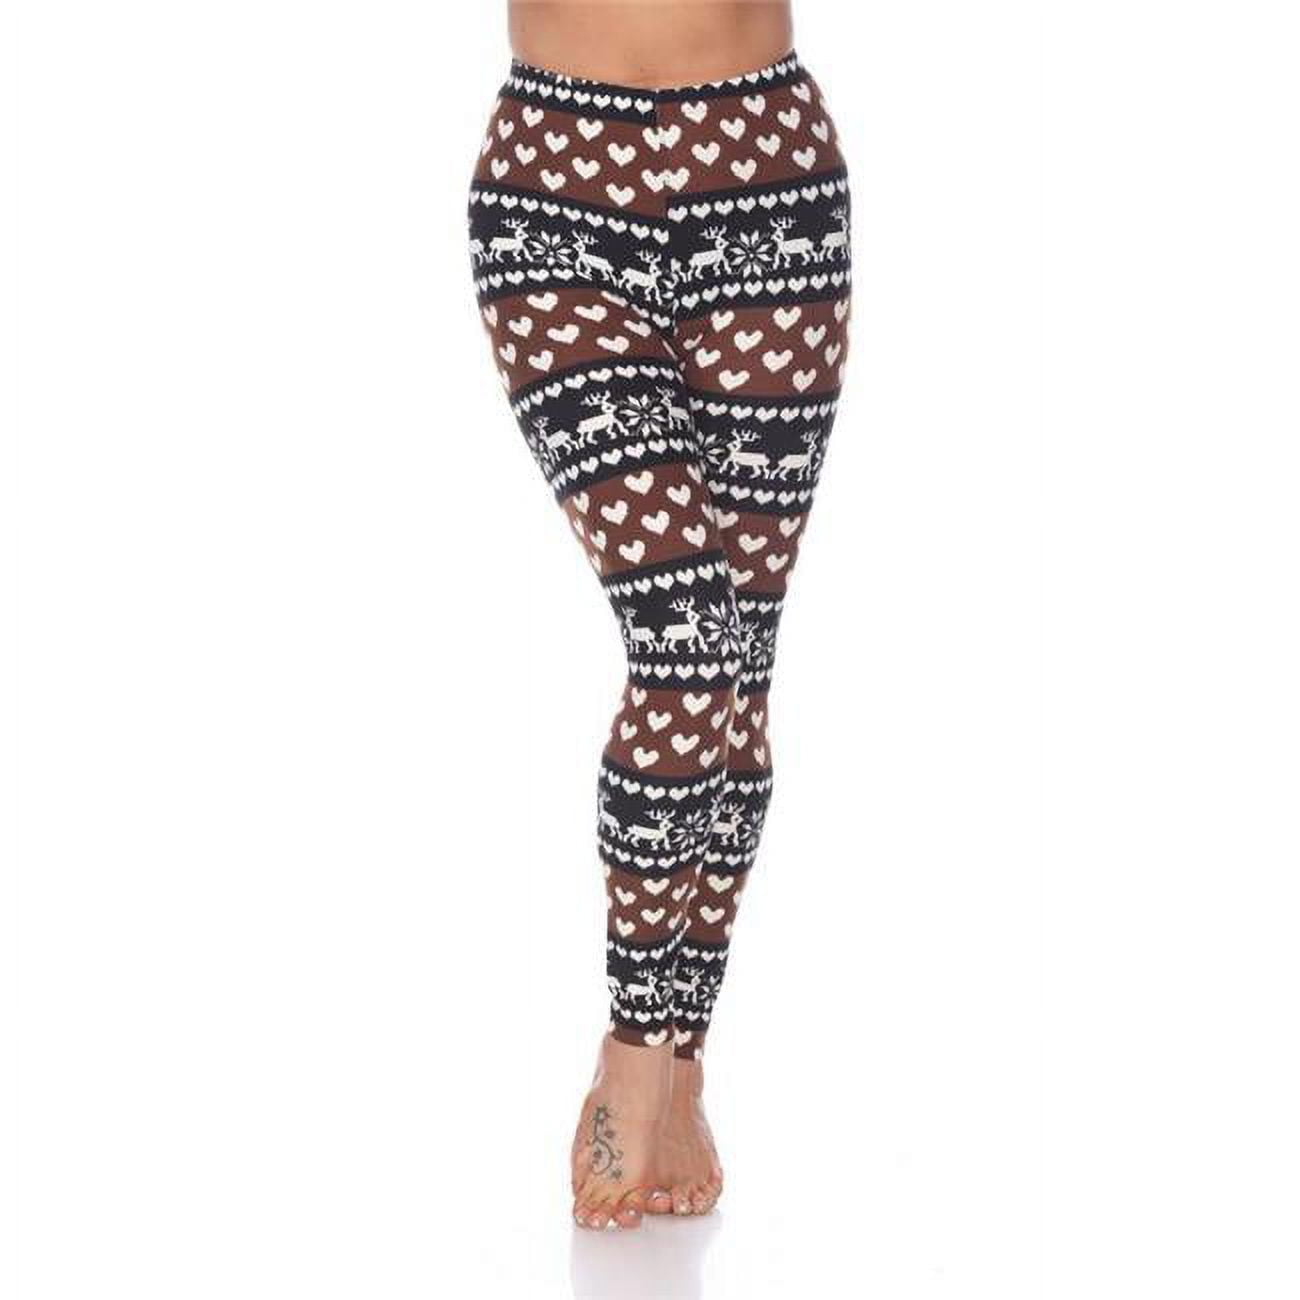 Women's One Size Fits Most Printed Leggings Grey/White One Size Fits Most -  White Mark